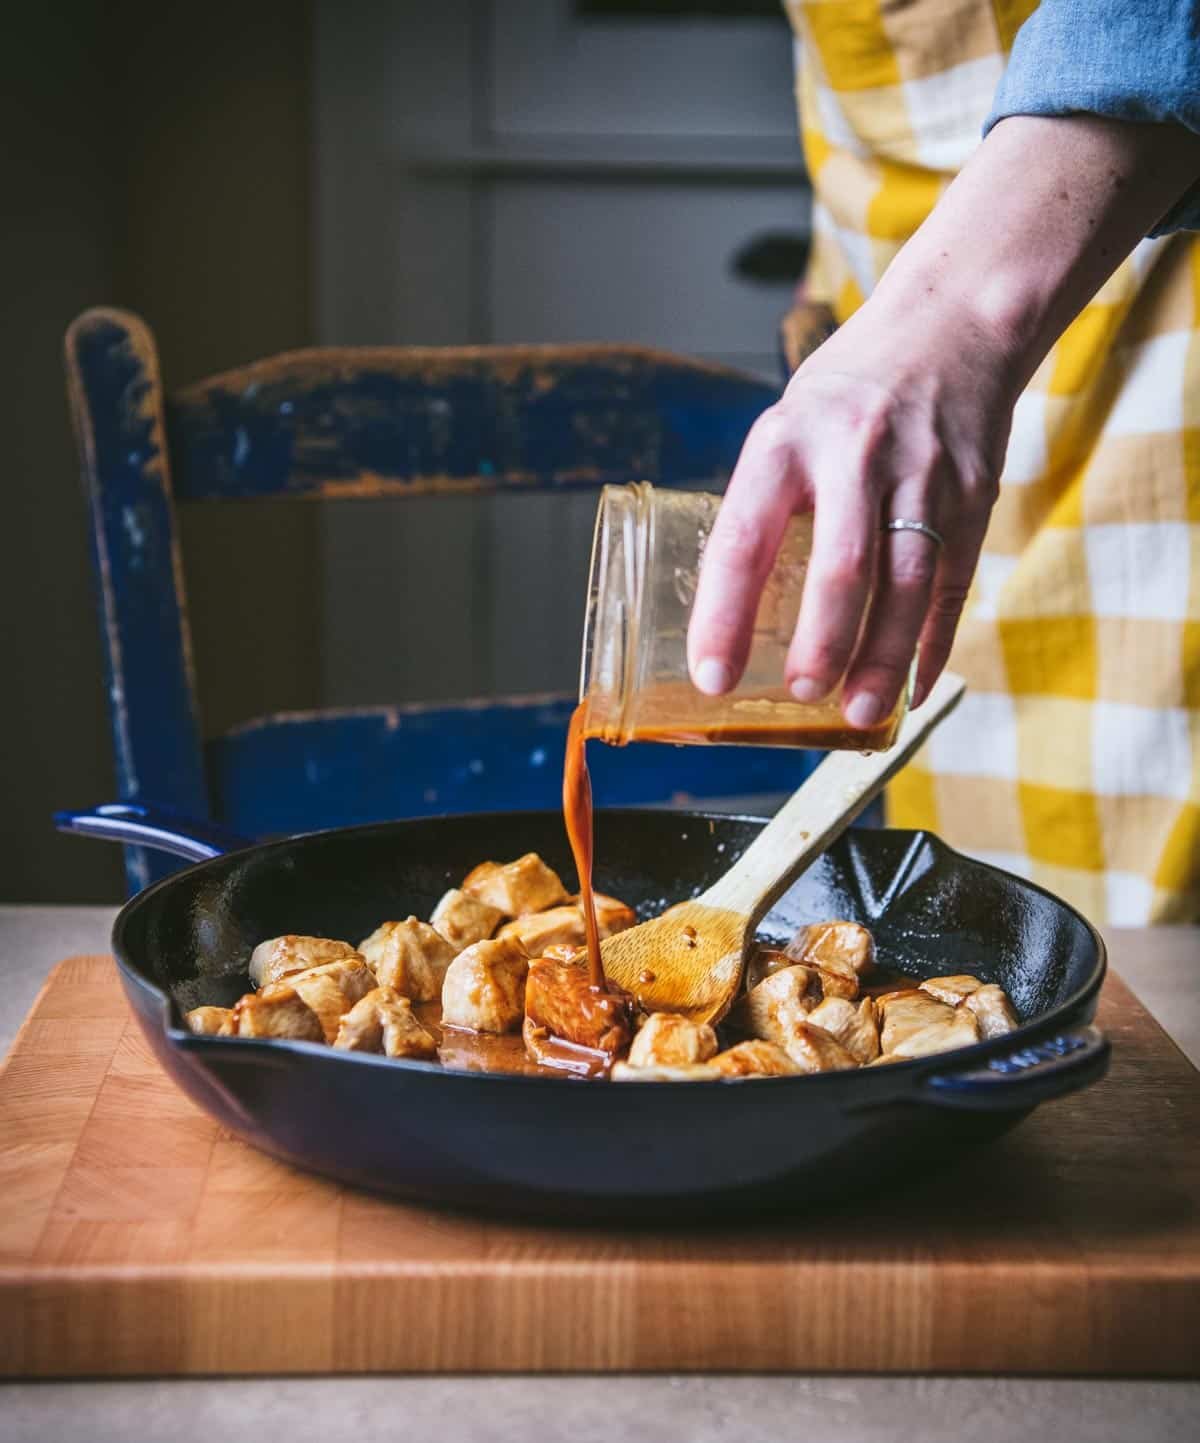 Pouring stir fry sauce into a skillet with chicken.